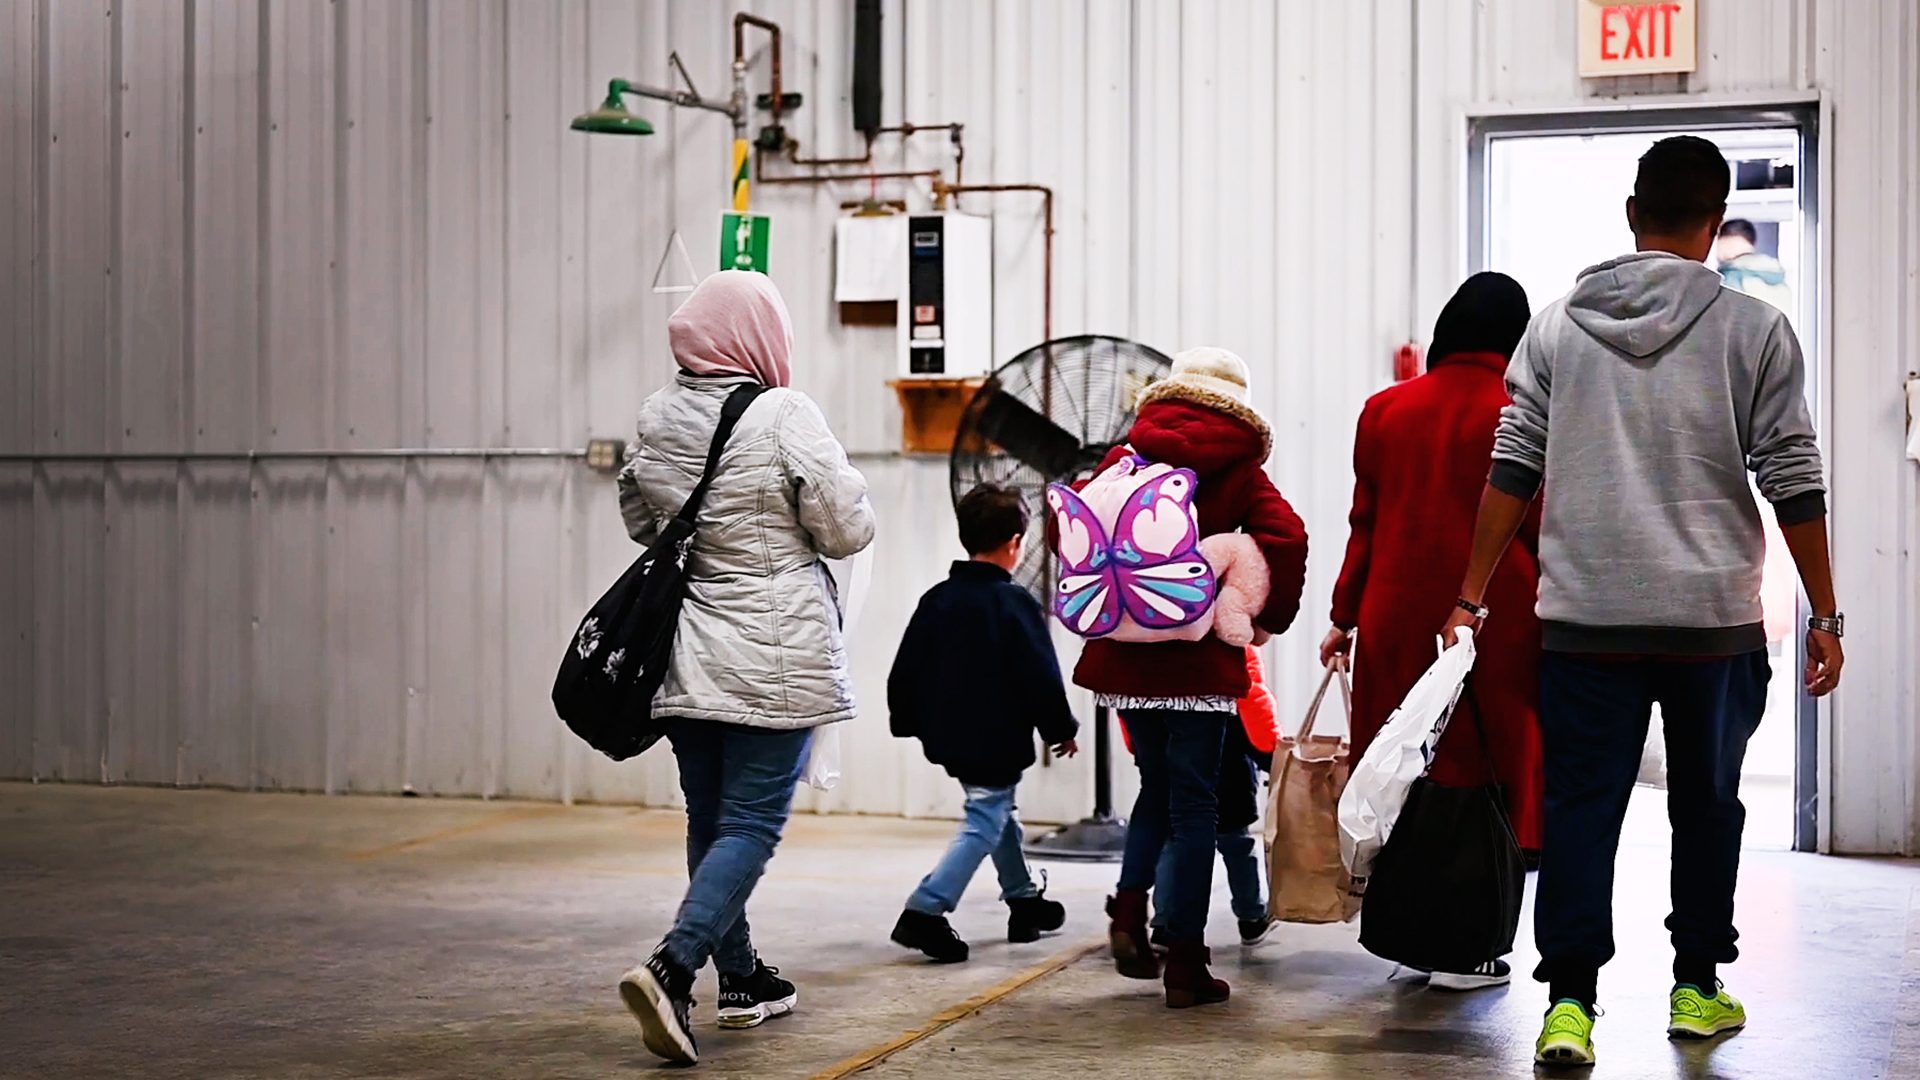 Multiple adults and children walk toward an exit door while inside a steel building with a concrete floor.